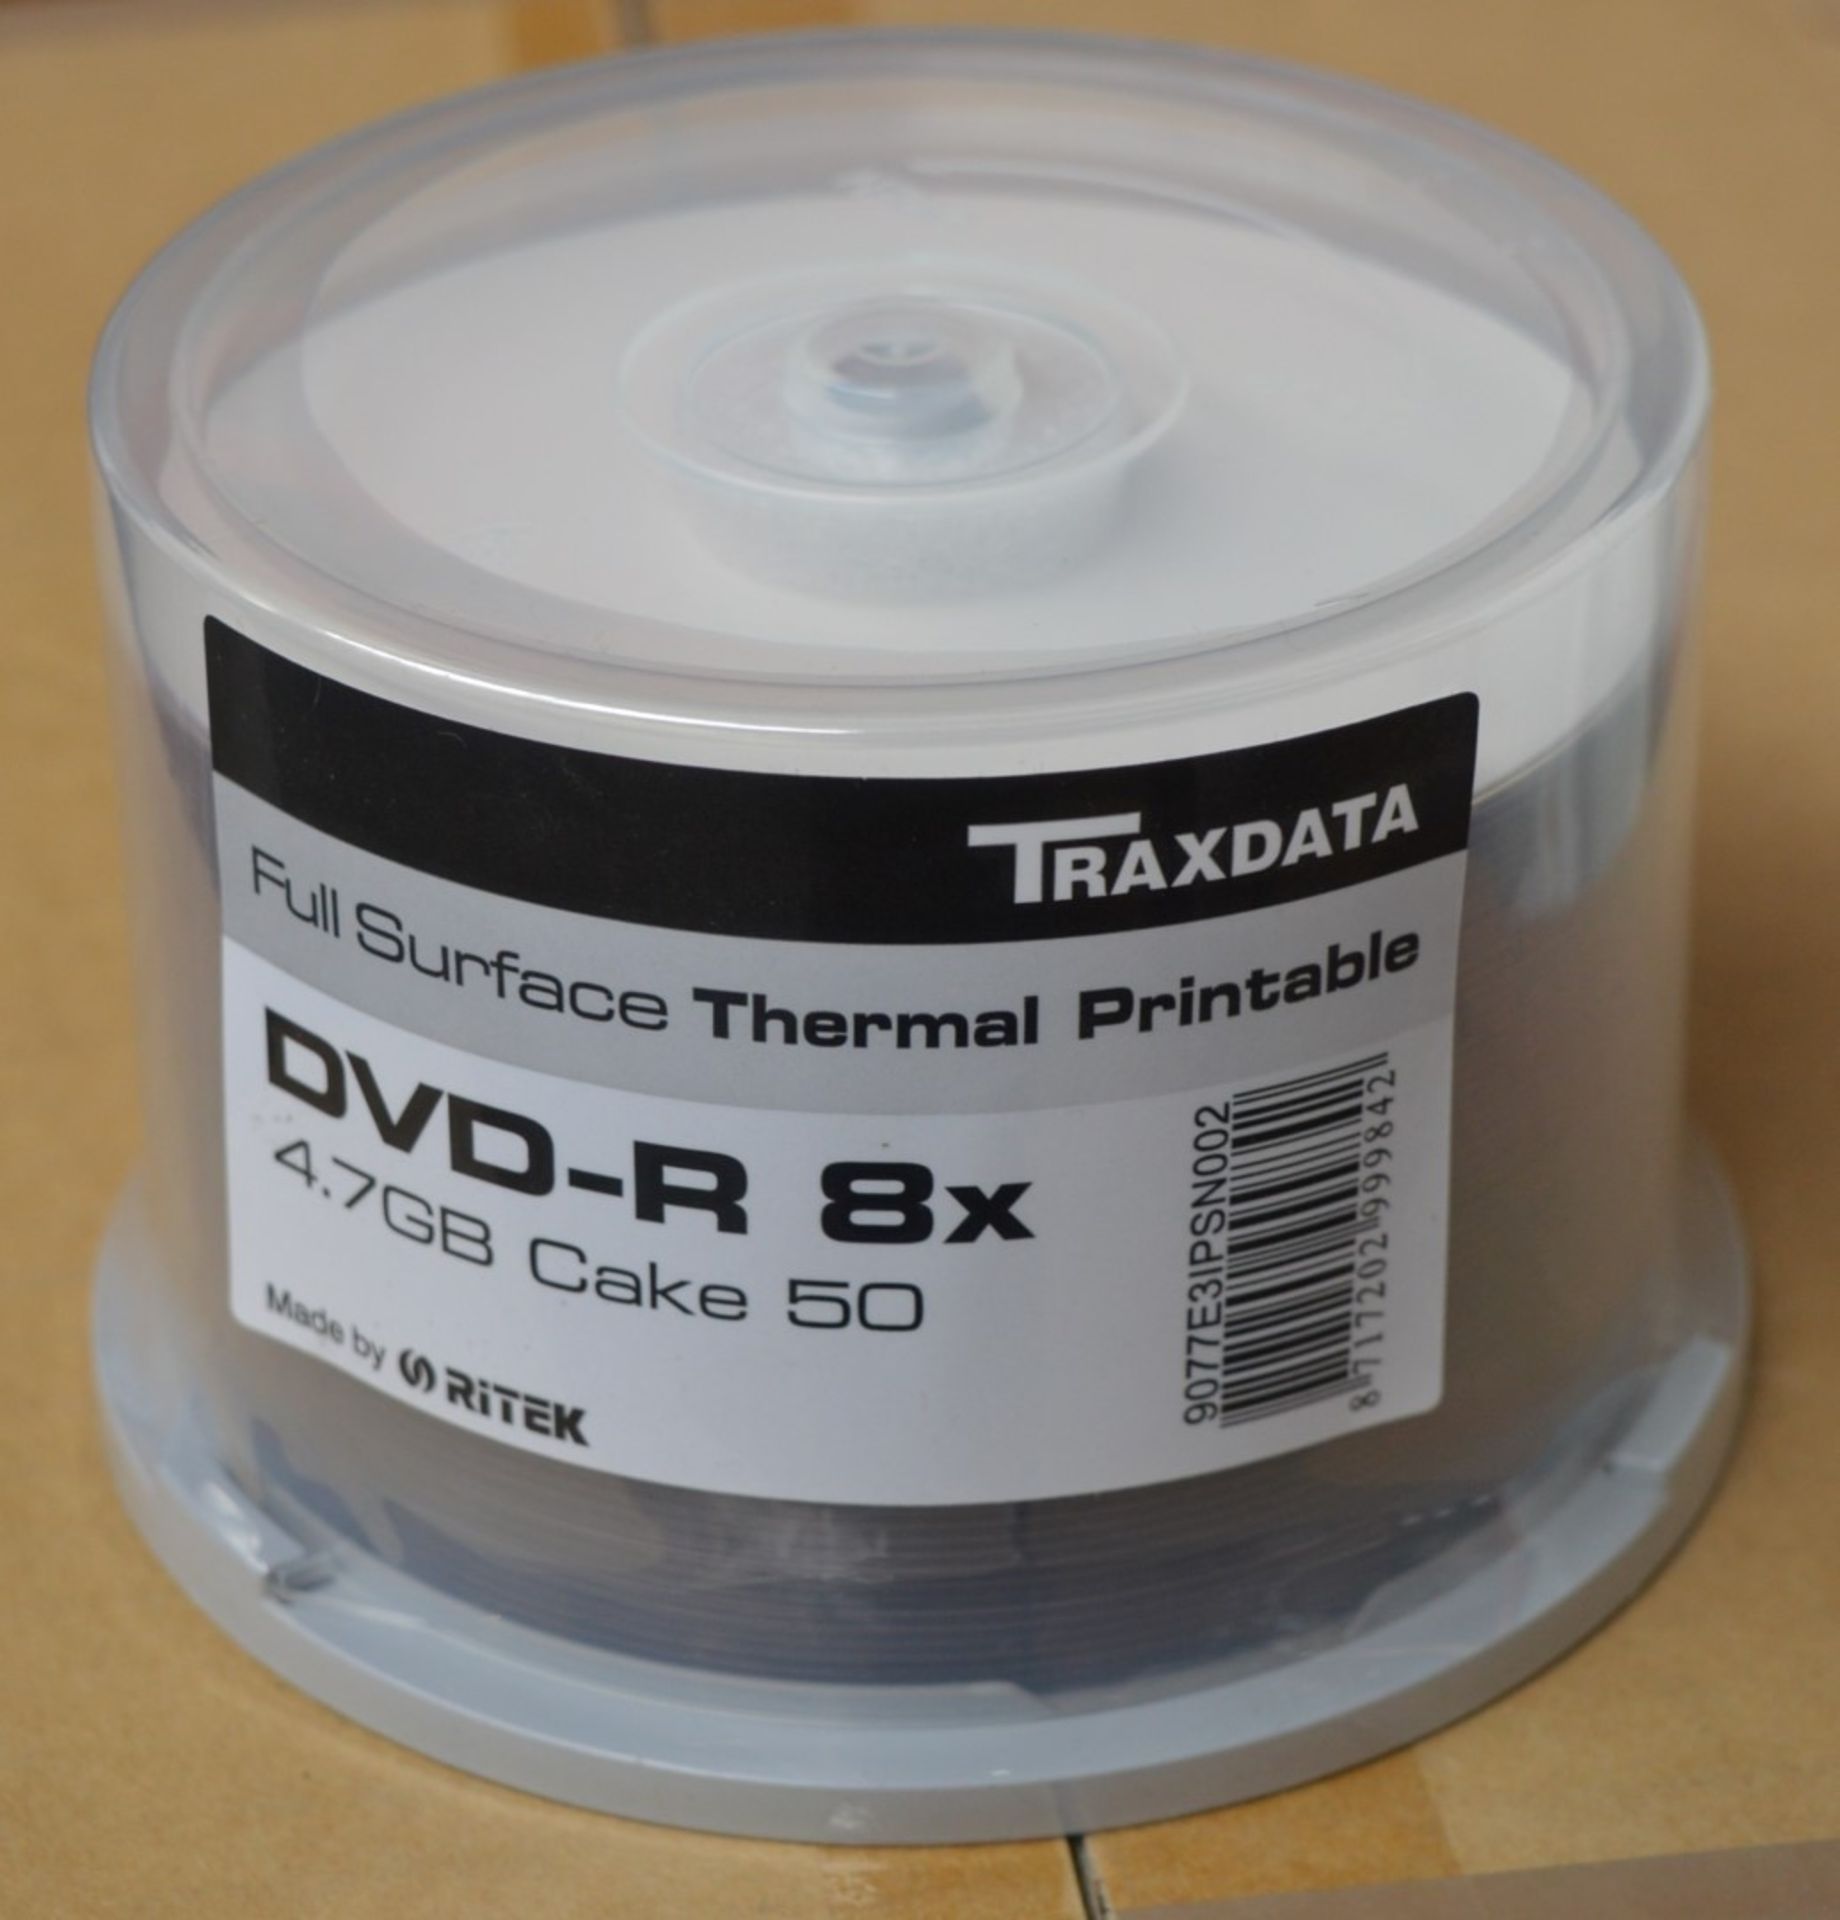 150 x Traxdata Full Surface Thermal Printable DVDR 8X Discs - Includes 3 x 4.7gb Cake of 50